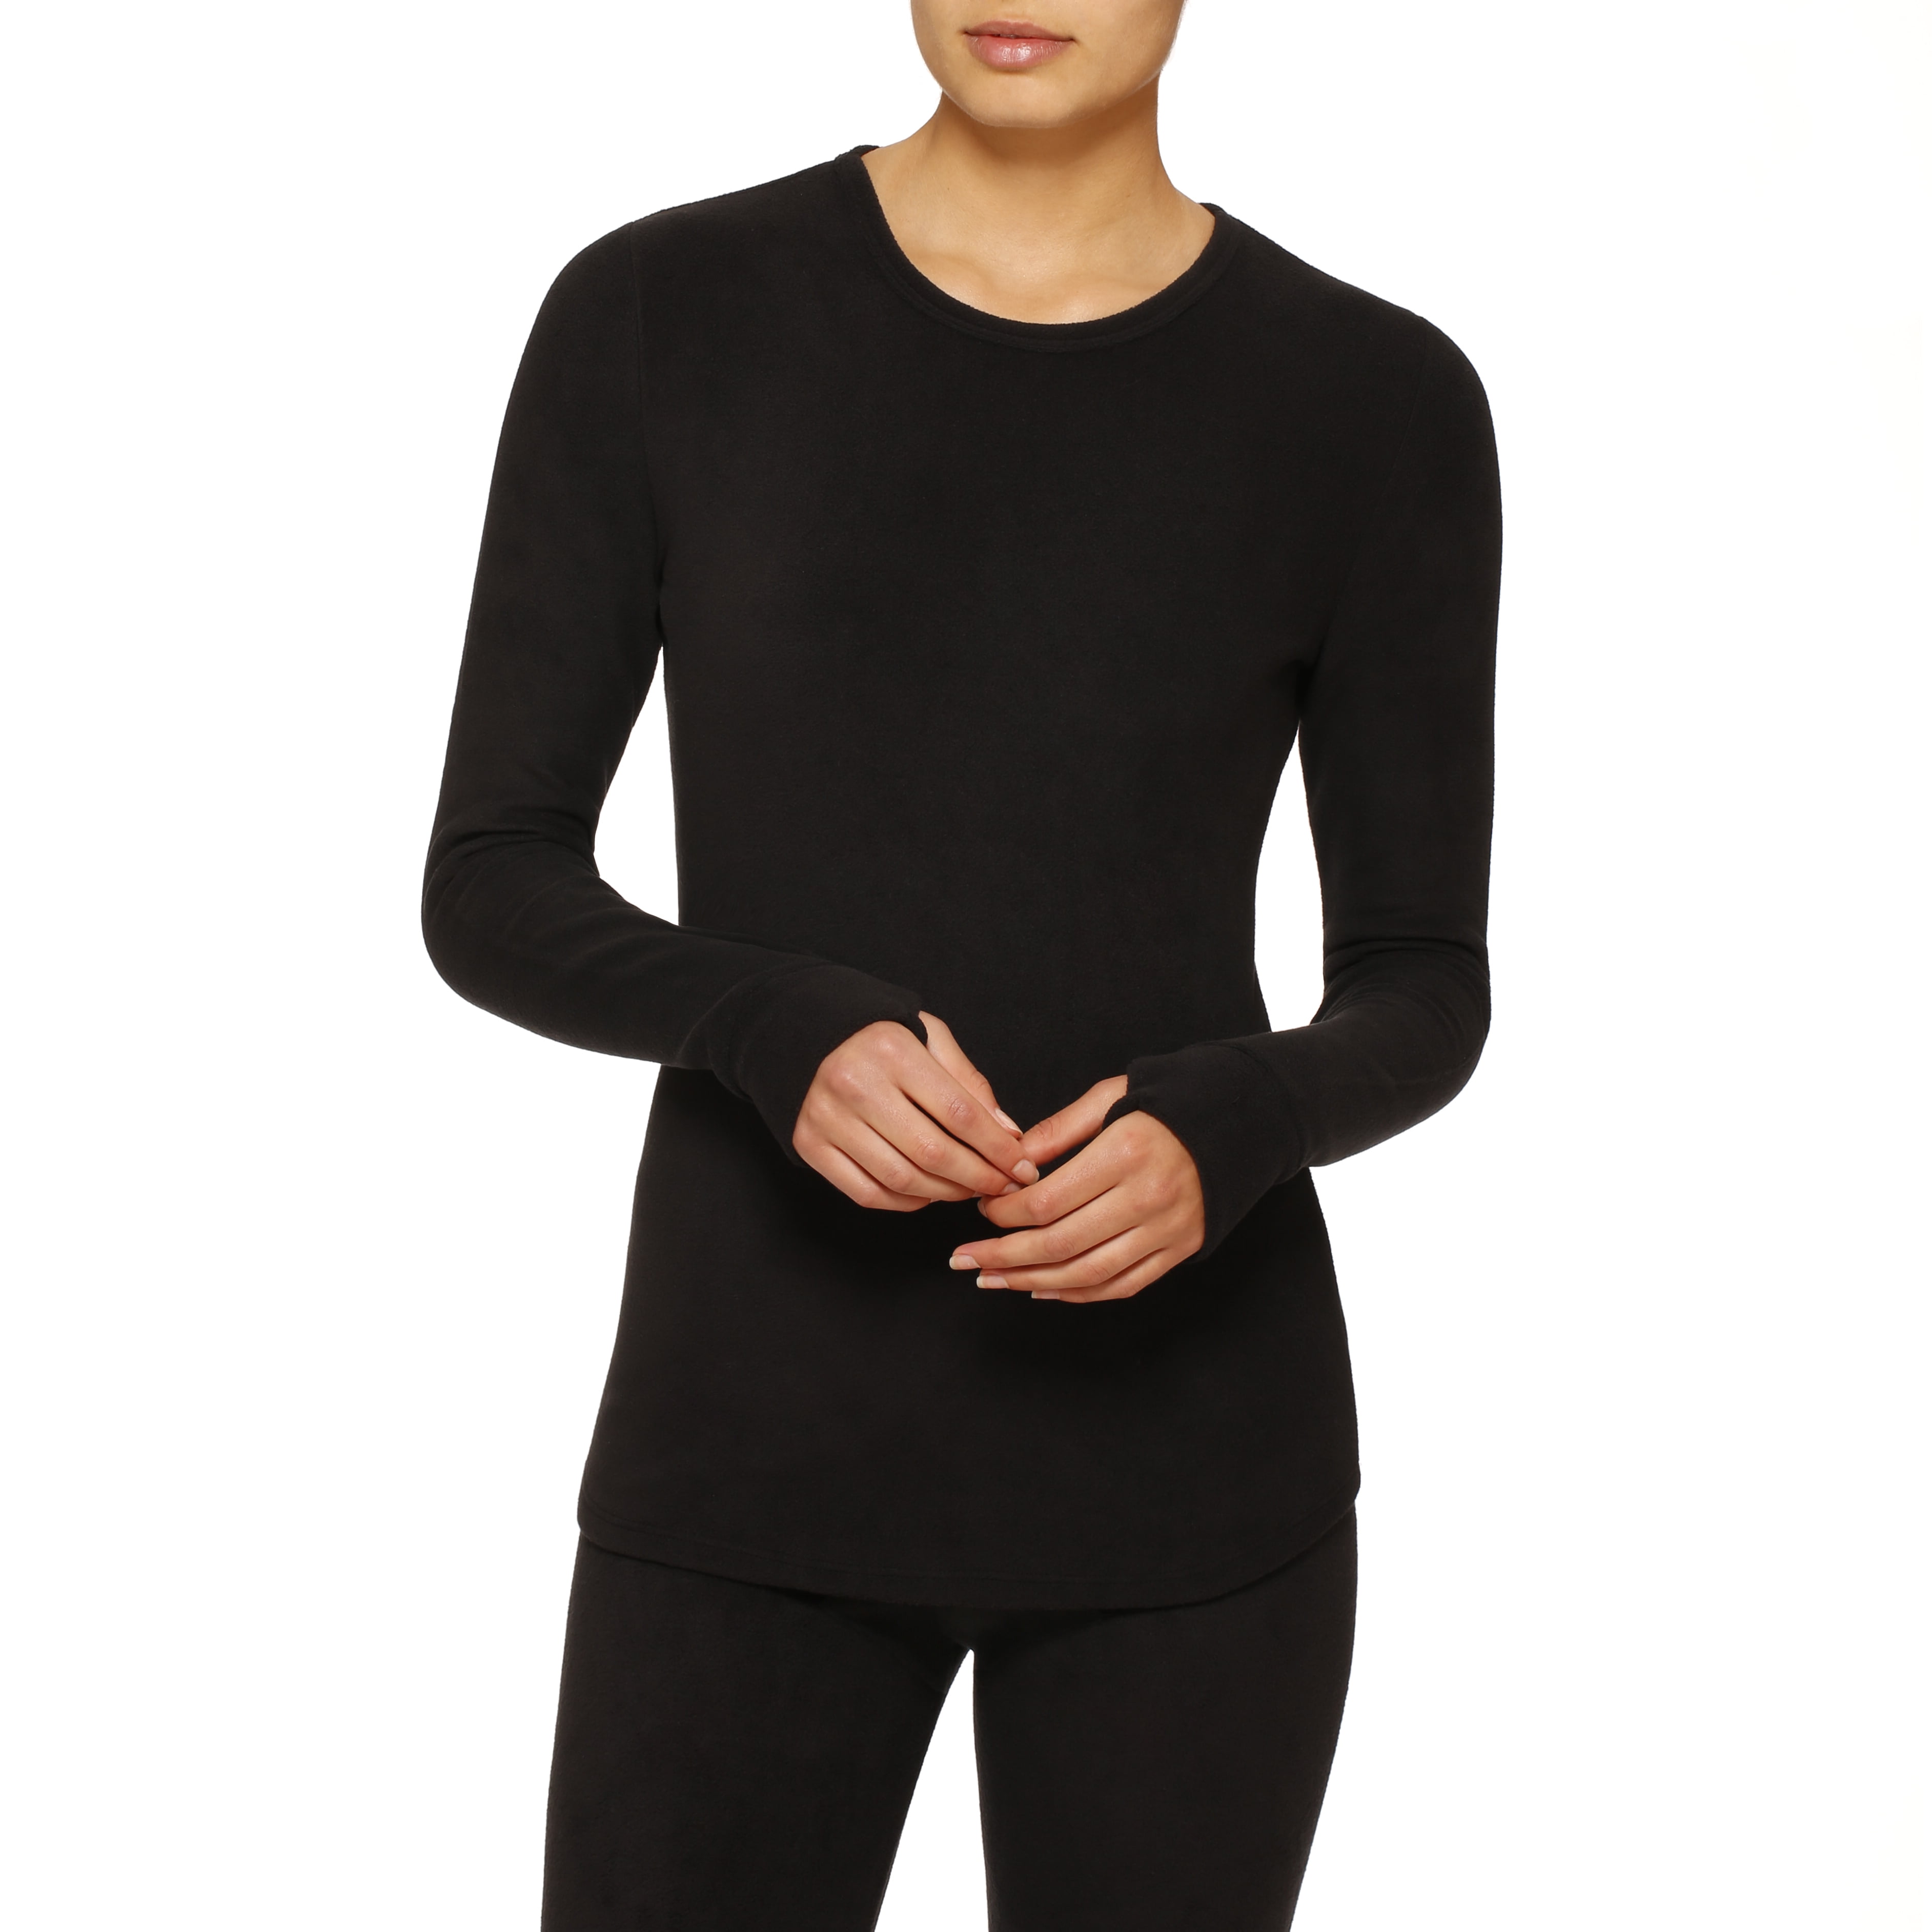 Climateright by Cuddle Duds Stretch Fleece Long Sleeve Crew top Small Black